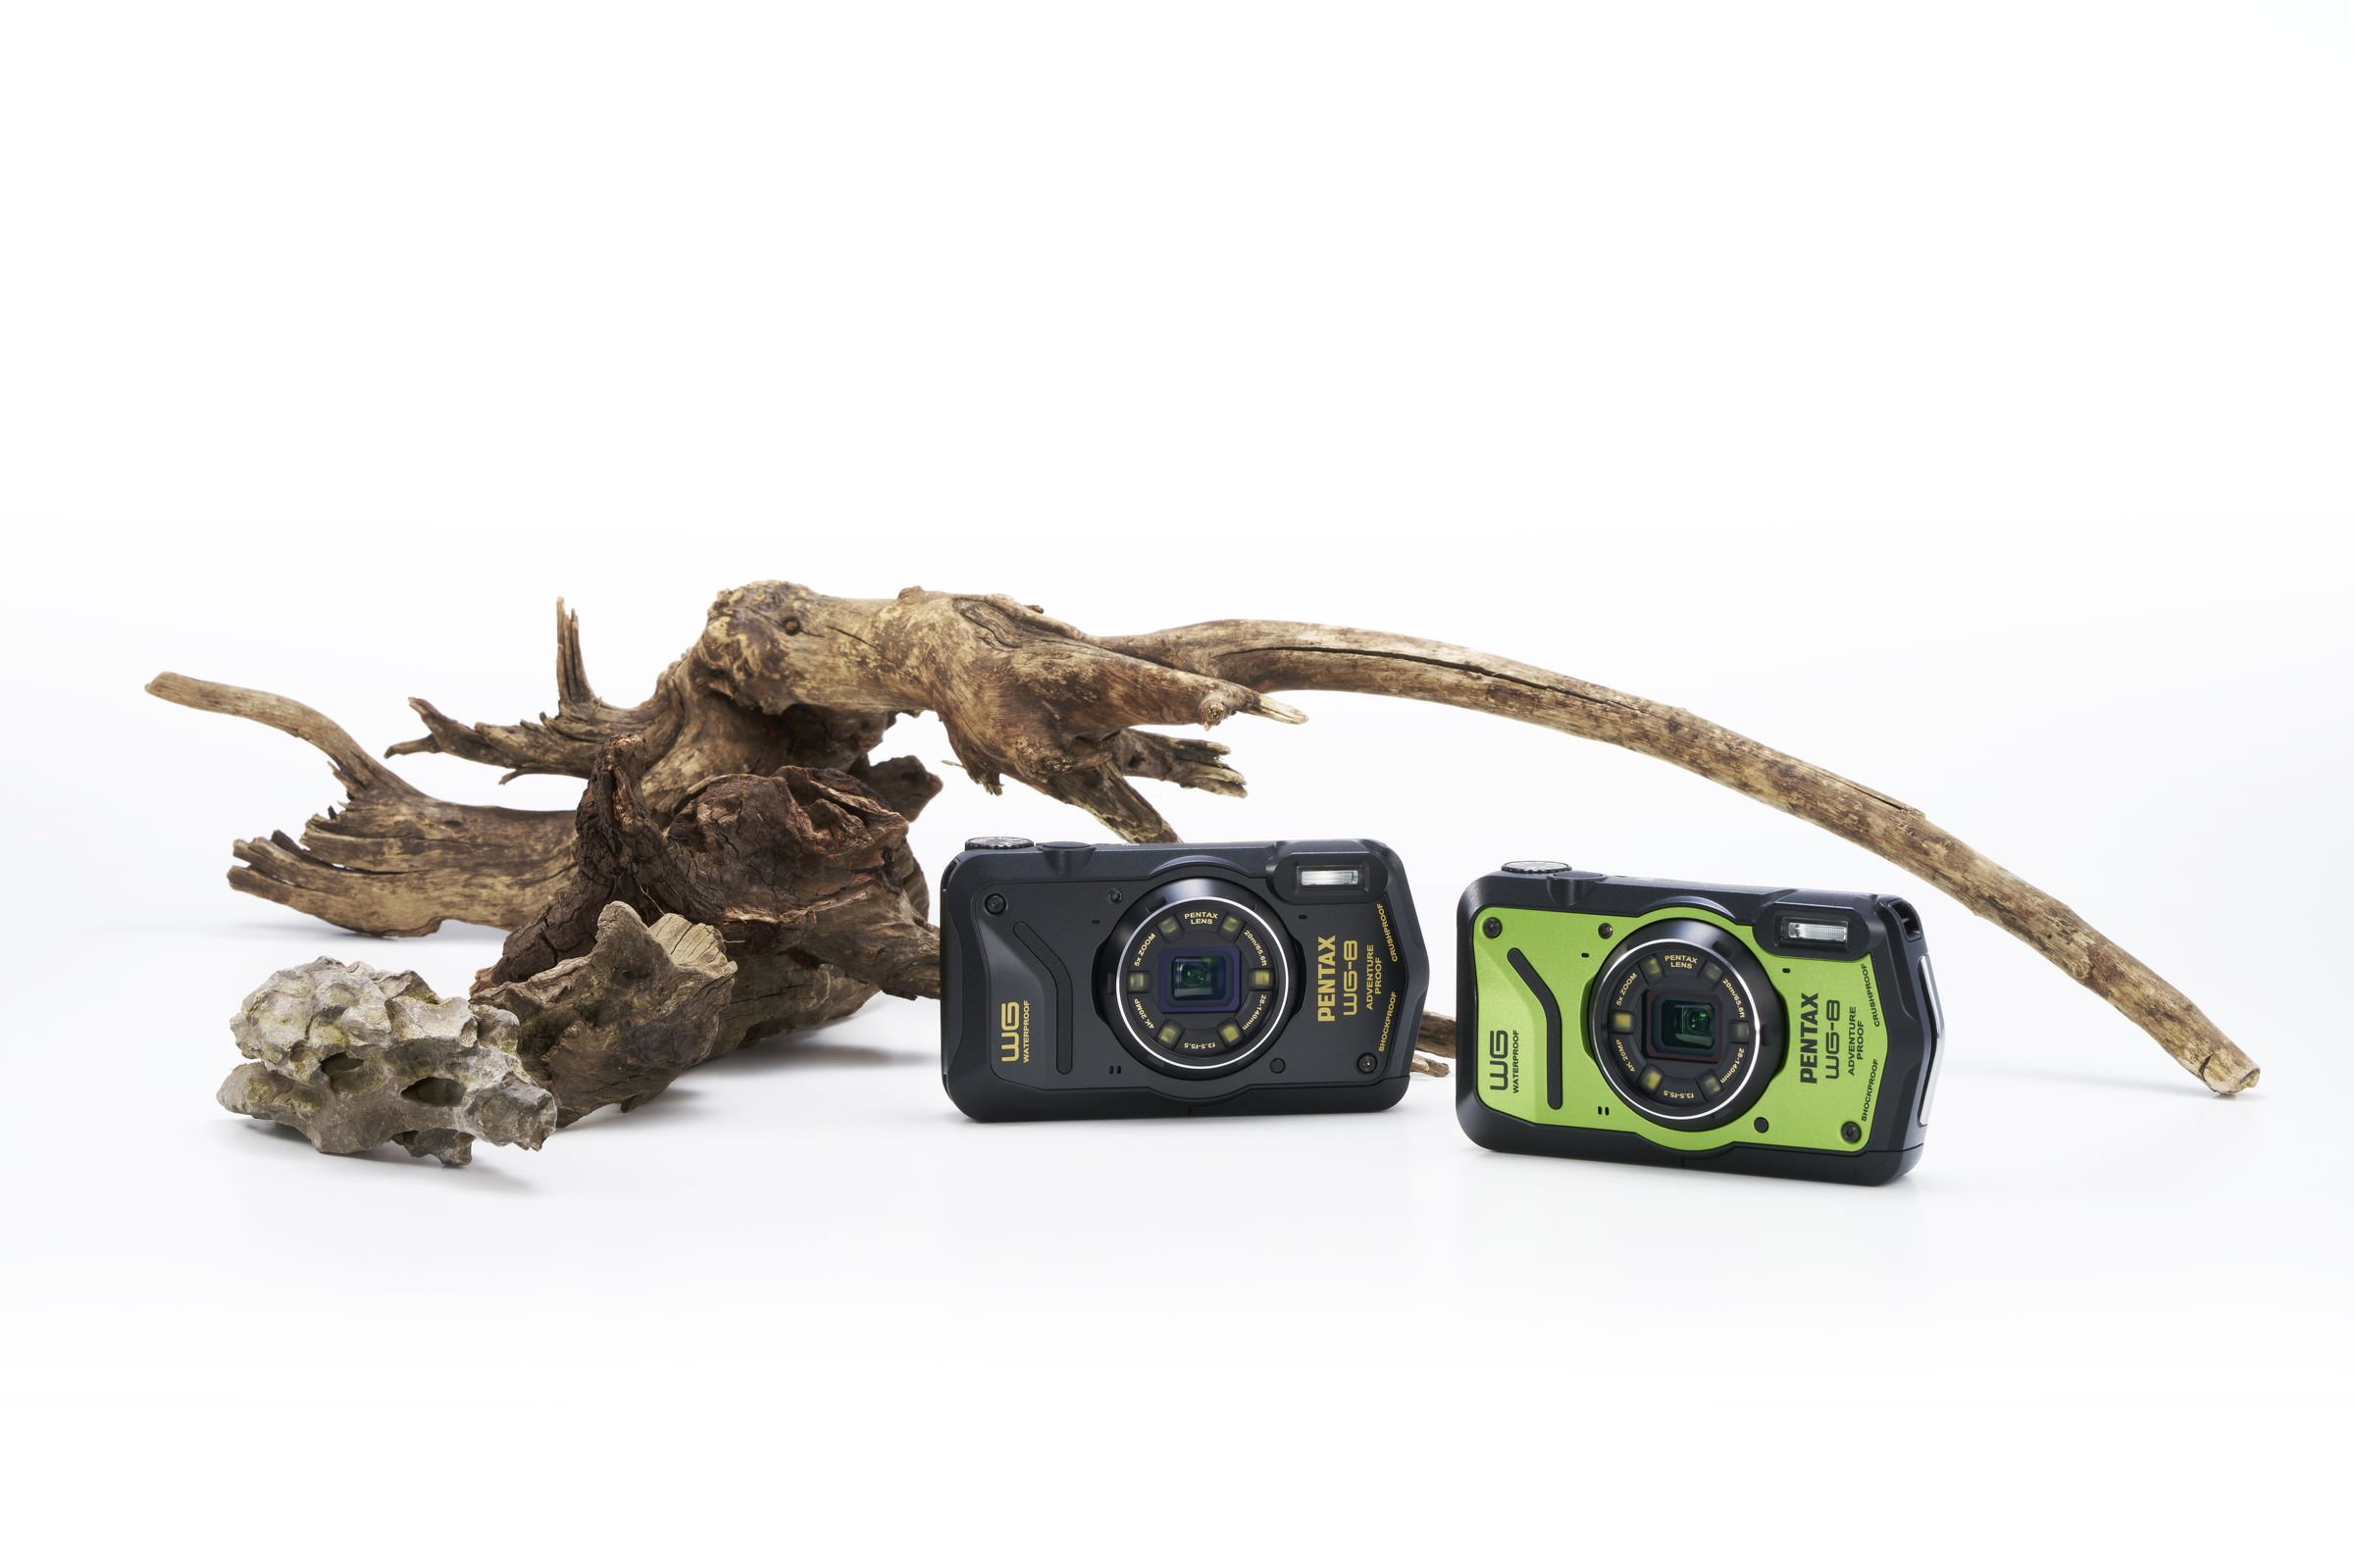 The Pentax WG-8 cameras in black and green next to some driftwood on a white background.